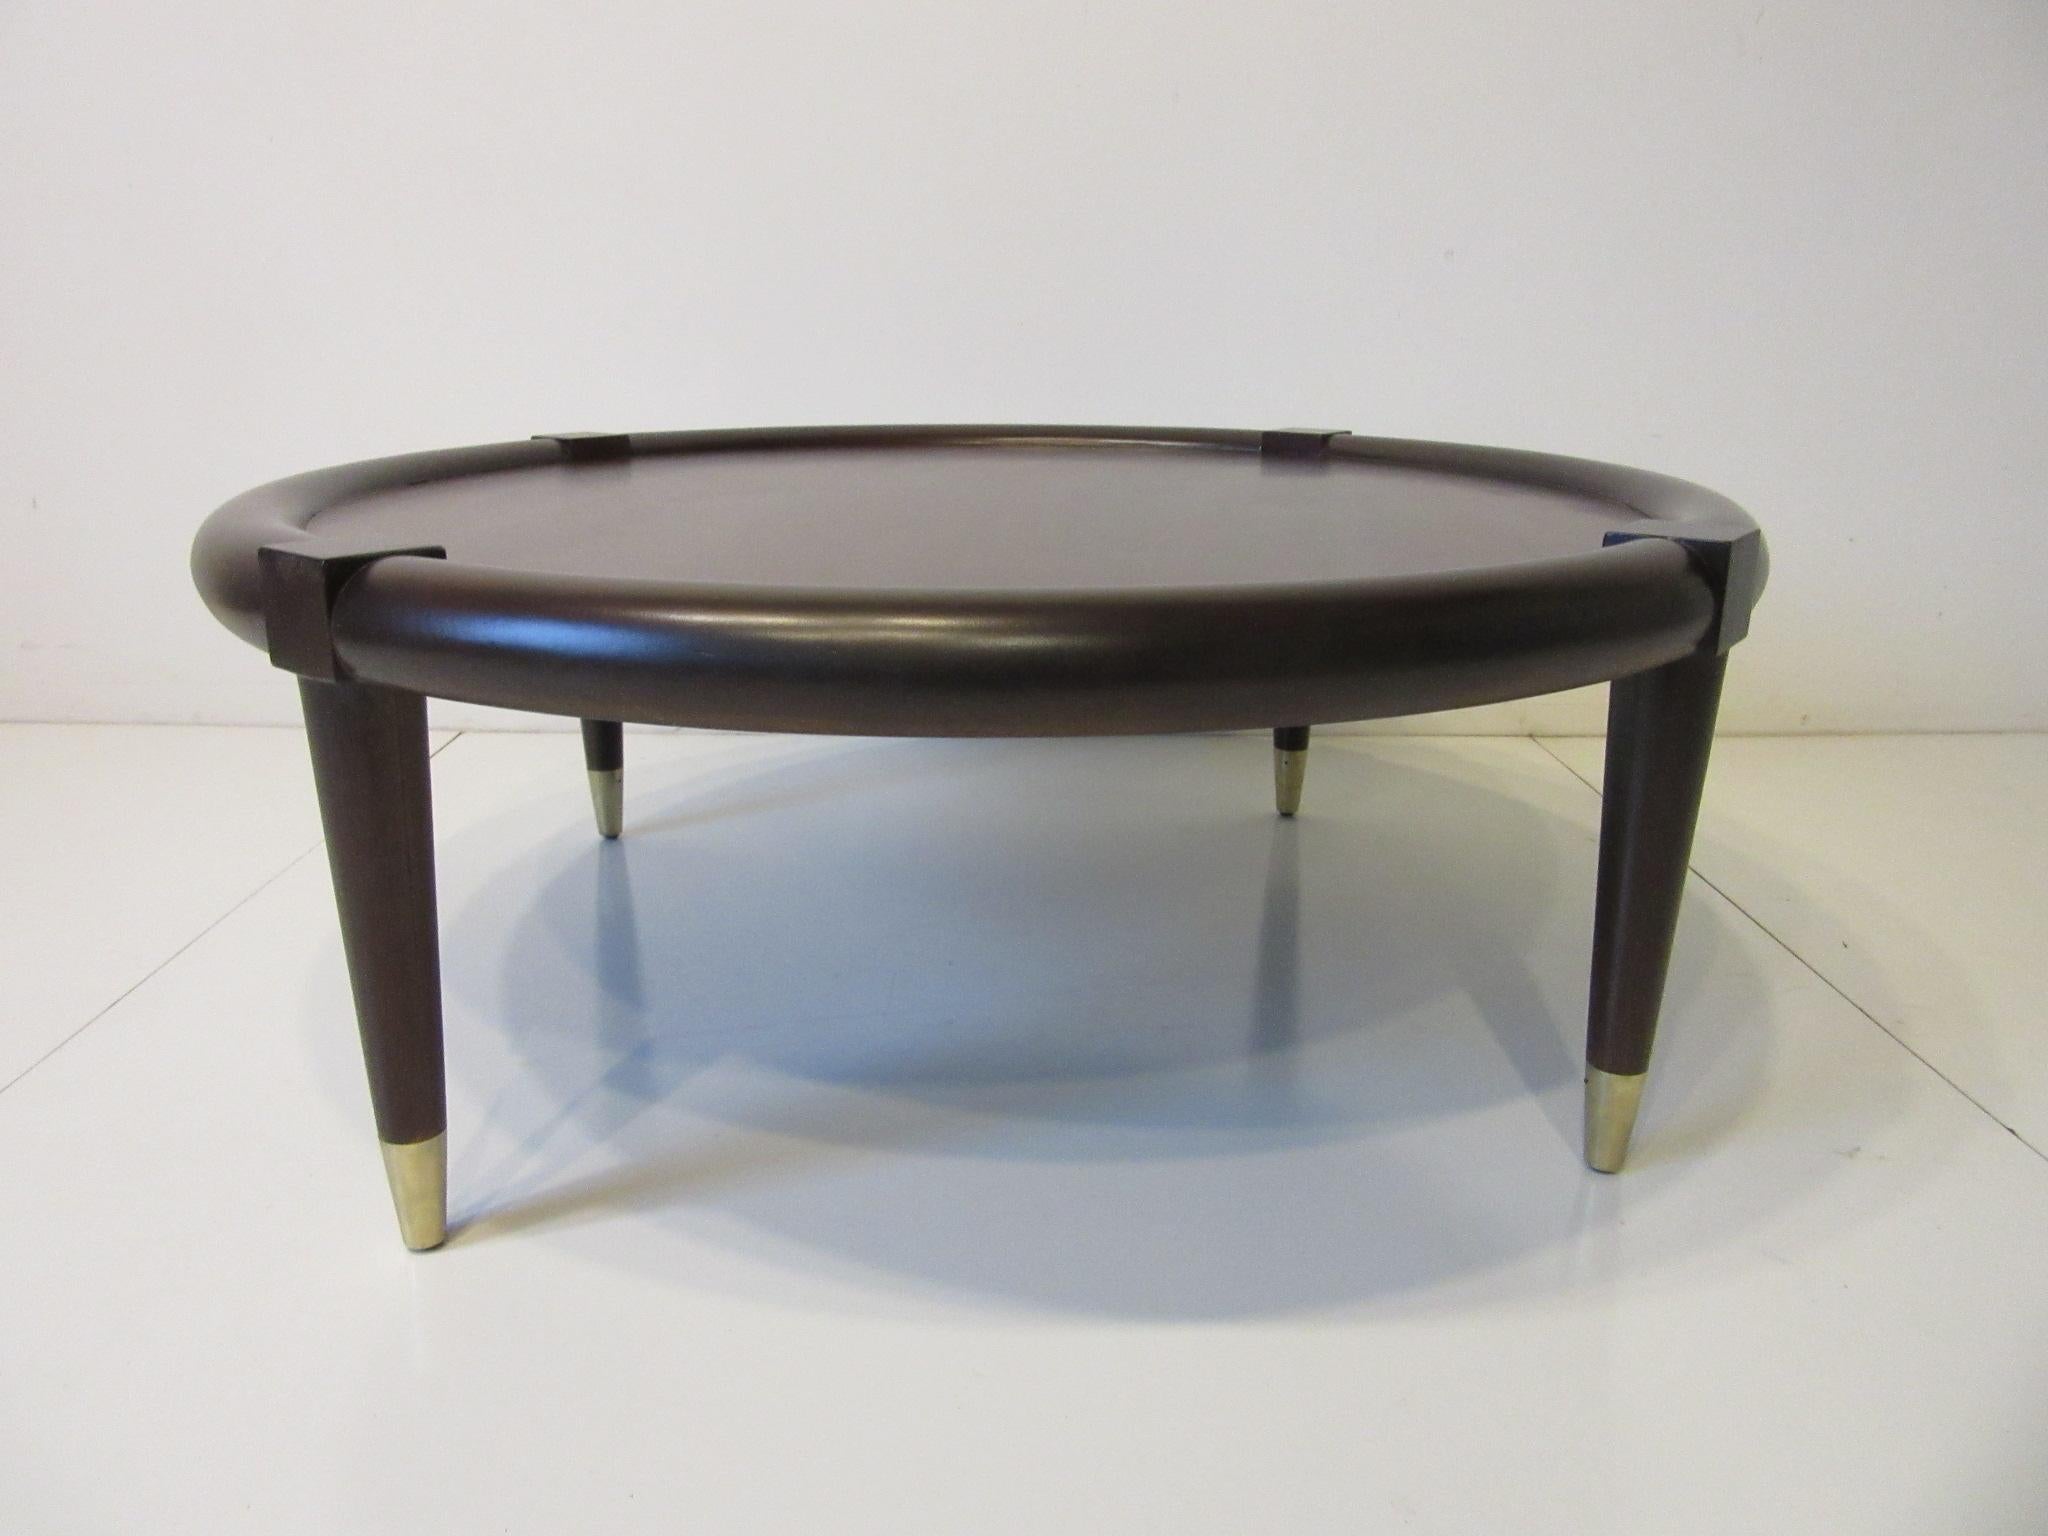 A round midcentury ebony toned bull nose coffee table with conical legs having brass tipped lower capped feet. The inserted wood center is very well grained and toned a bit lighter giving the piece some depth and can work in many different interiors